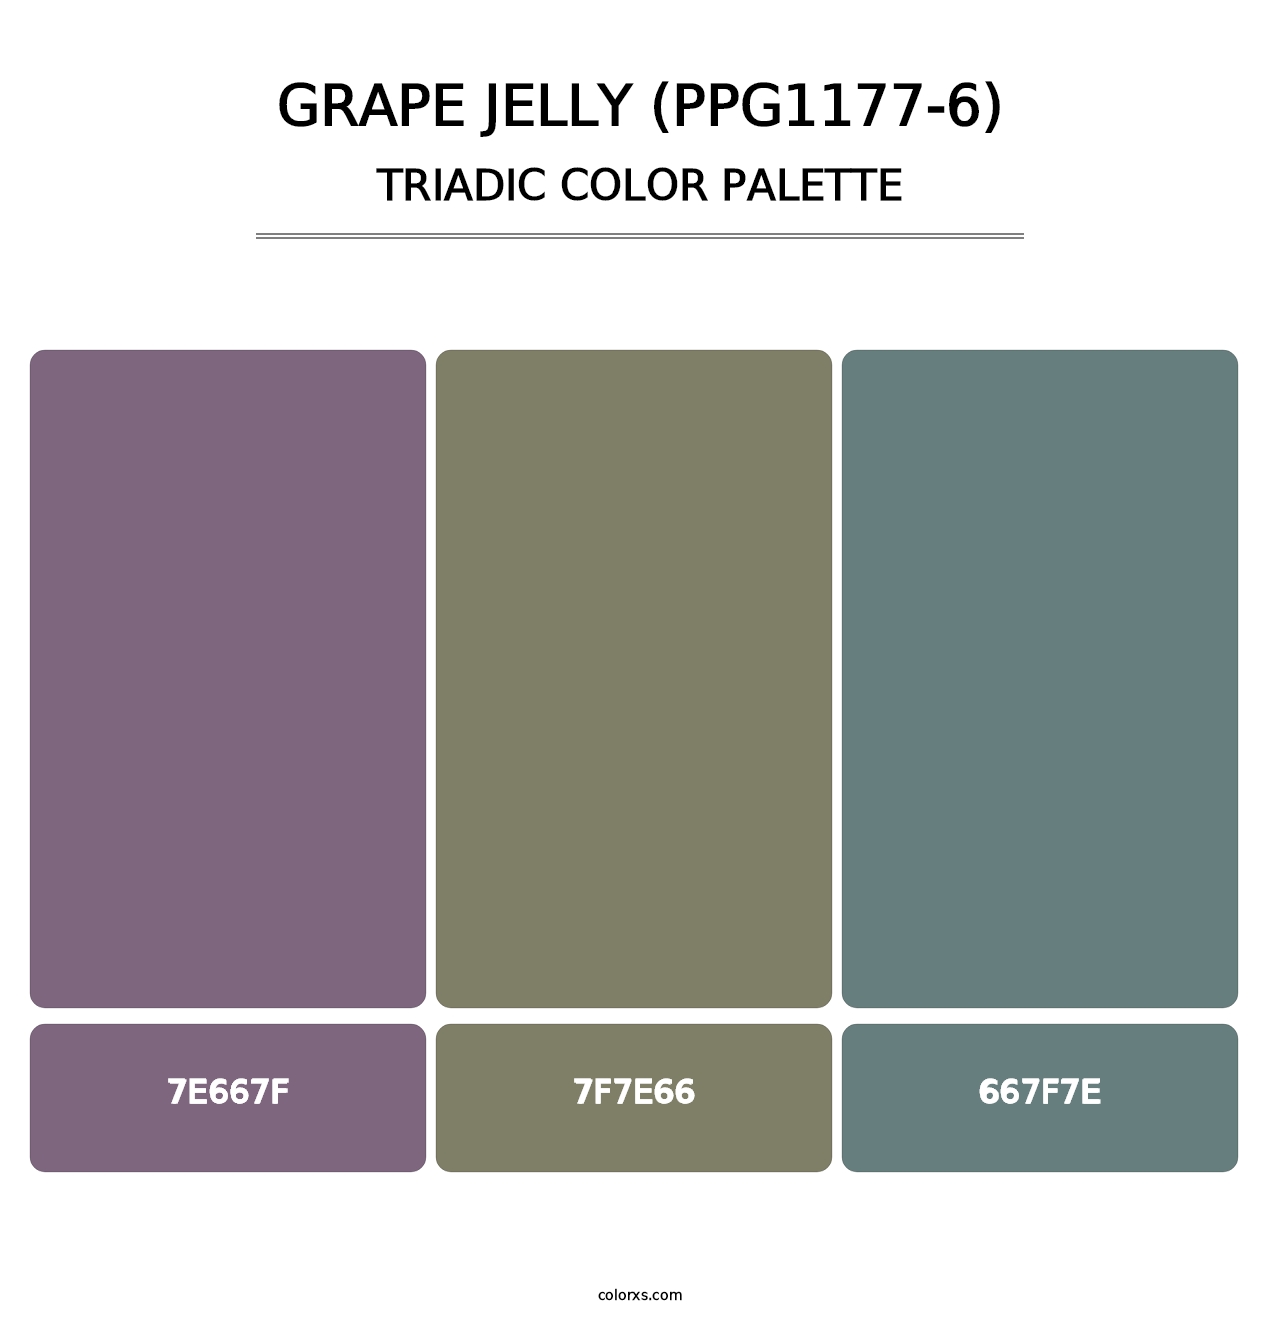 Grape Jelly (PPG1177-6) - Triadic Color Palette